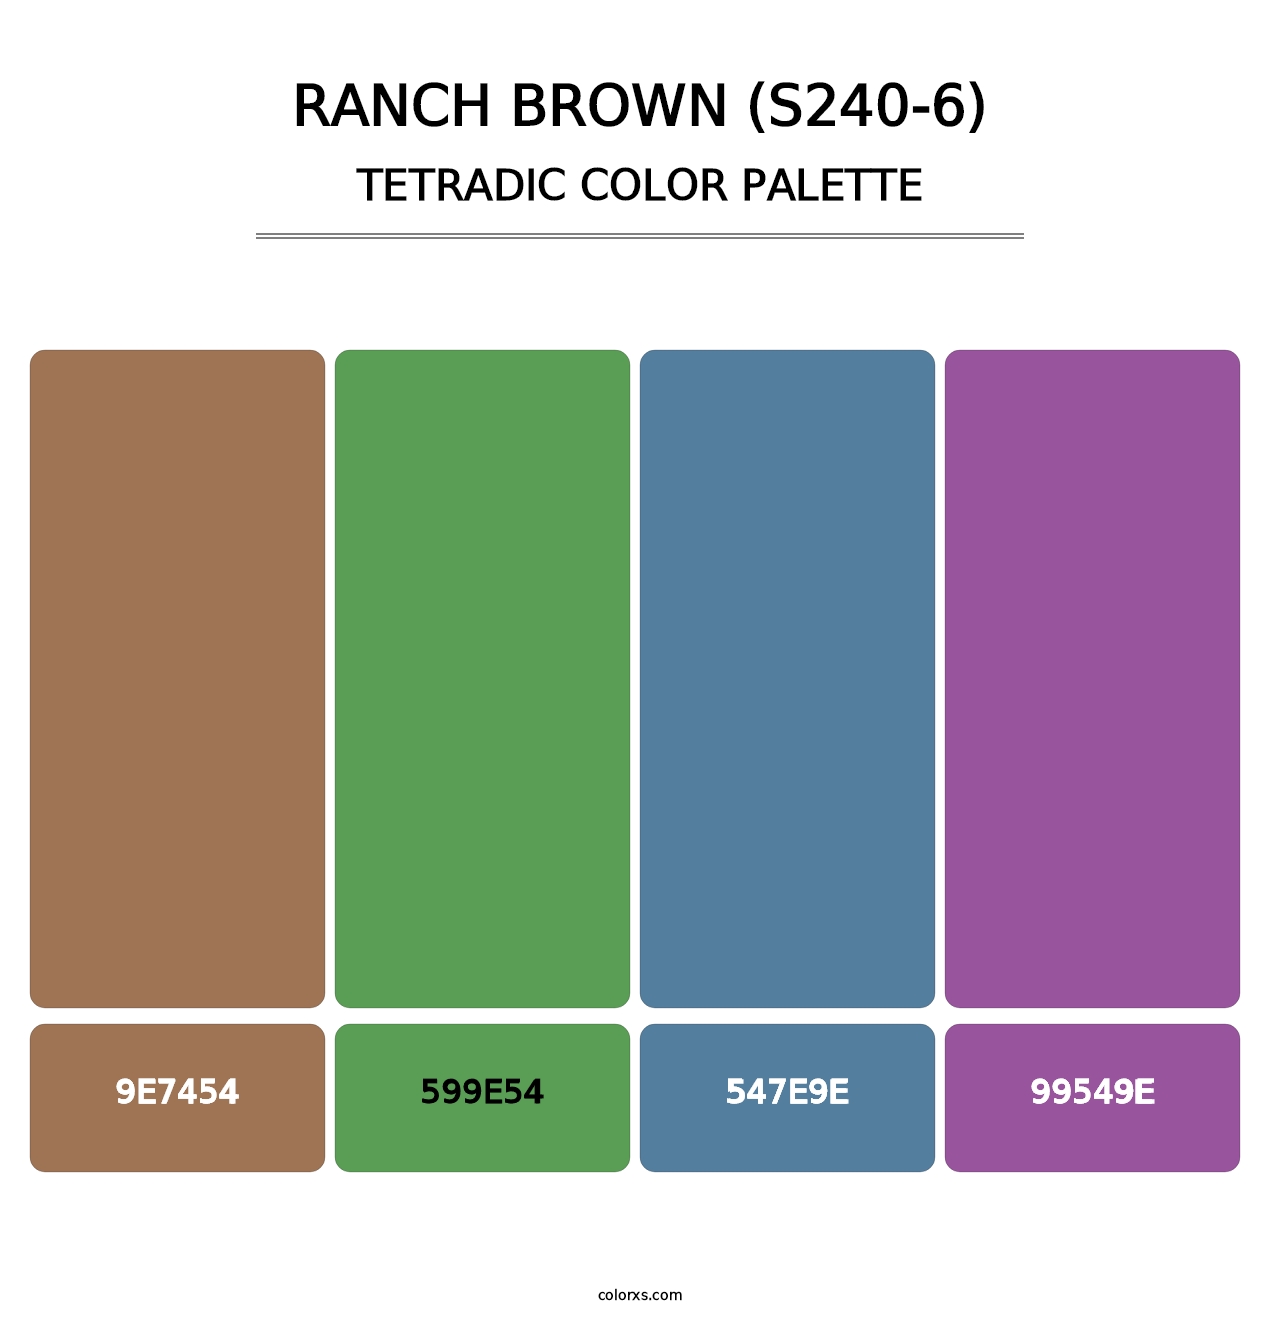 Ranch Brown (S240-6) - Tetradic Color Palette